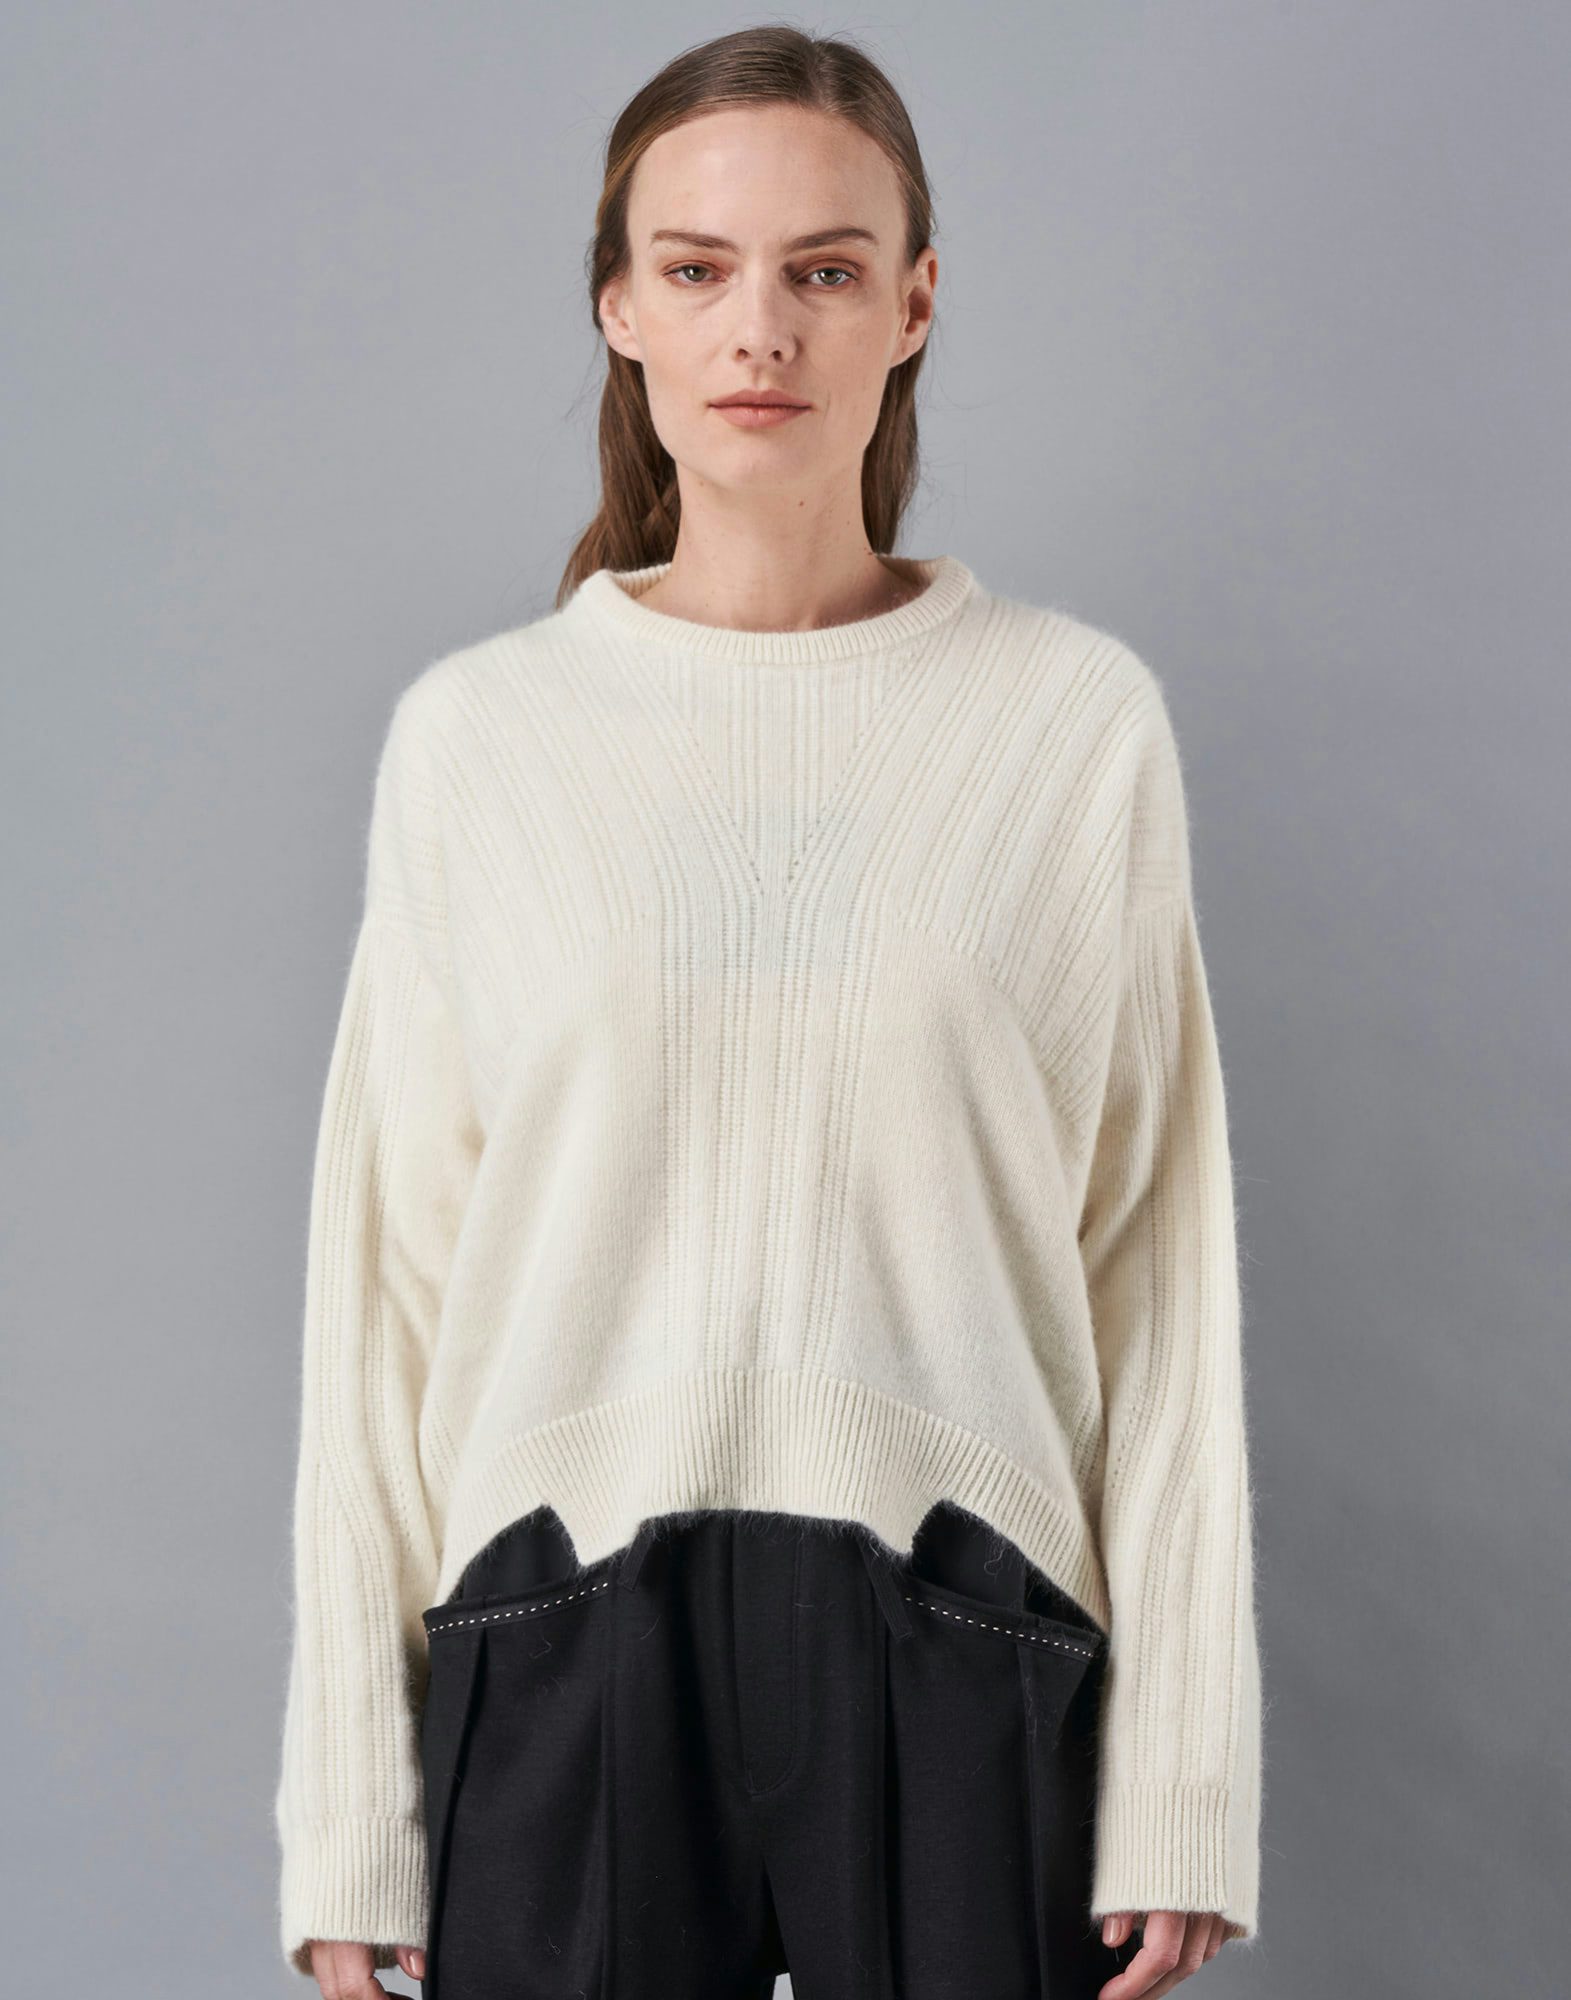 REVERIE : Very wide sweater in cream angora and wool